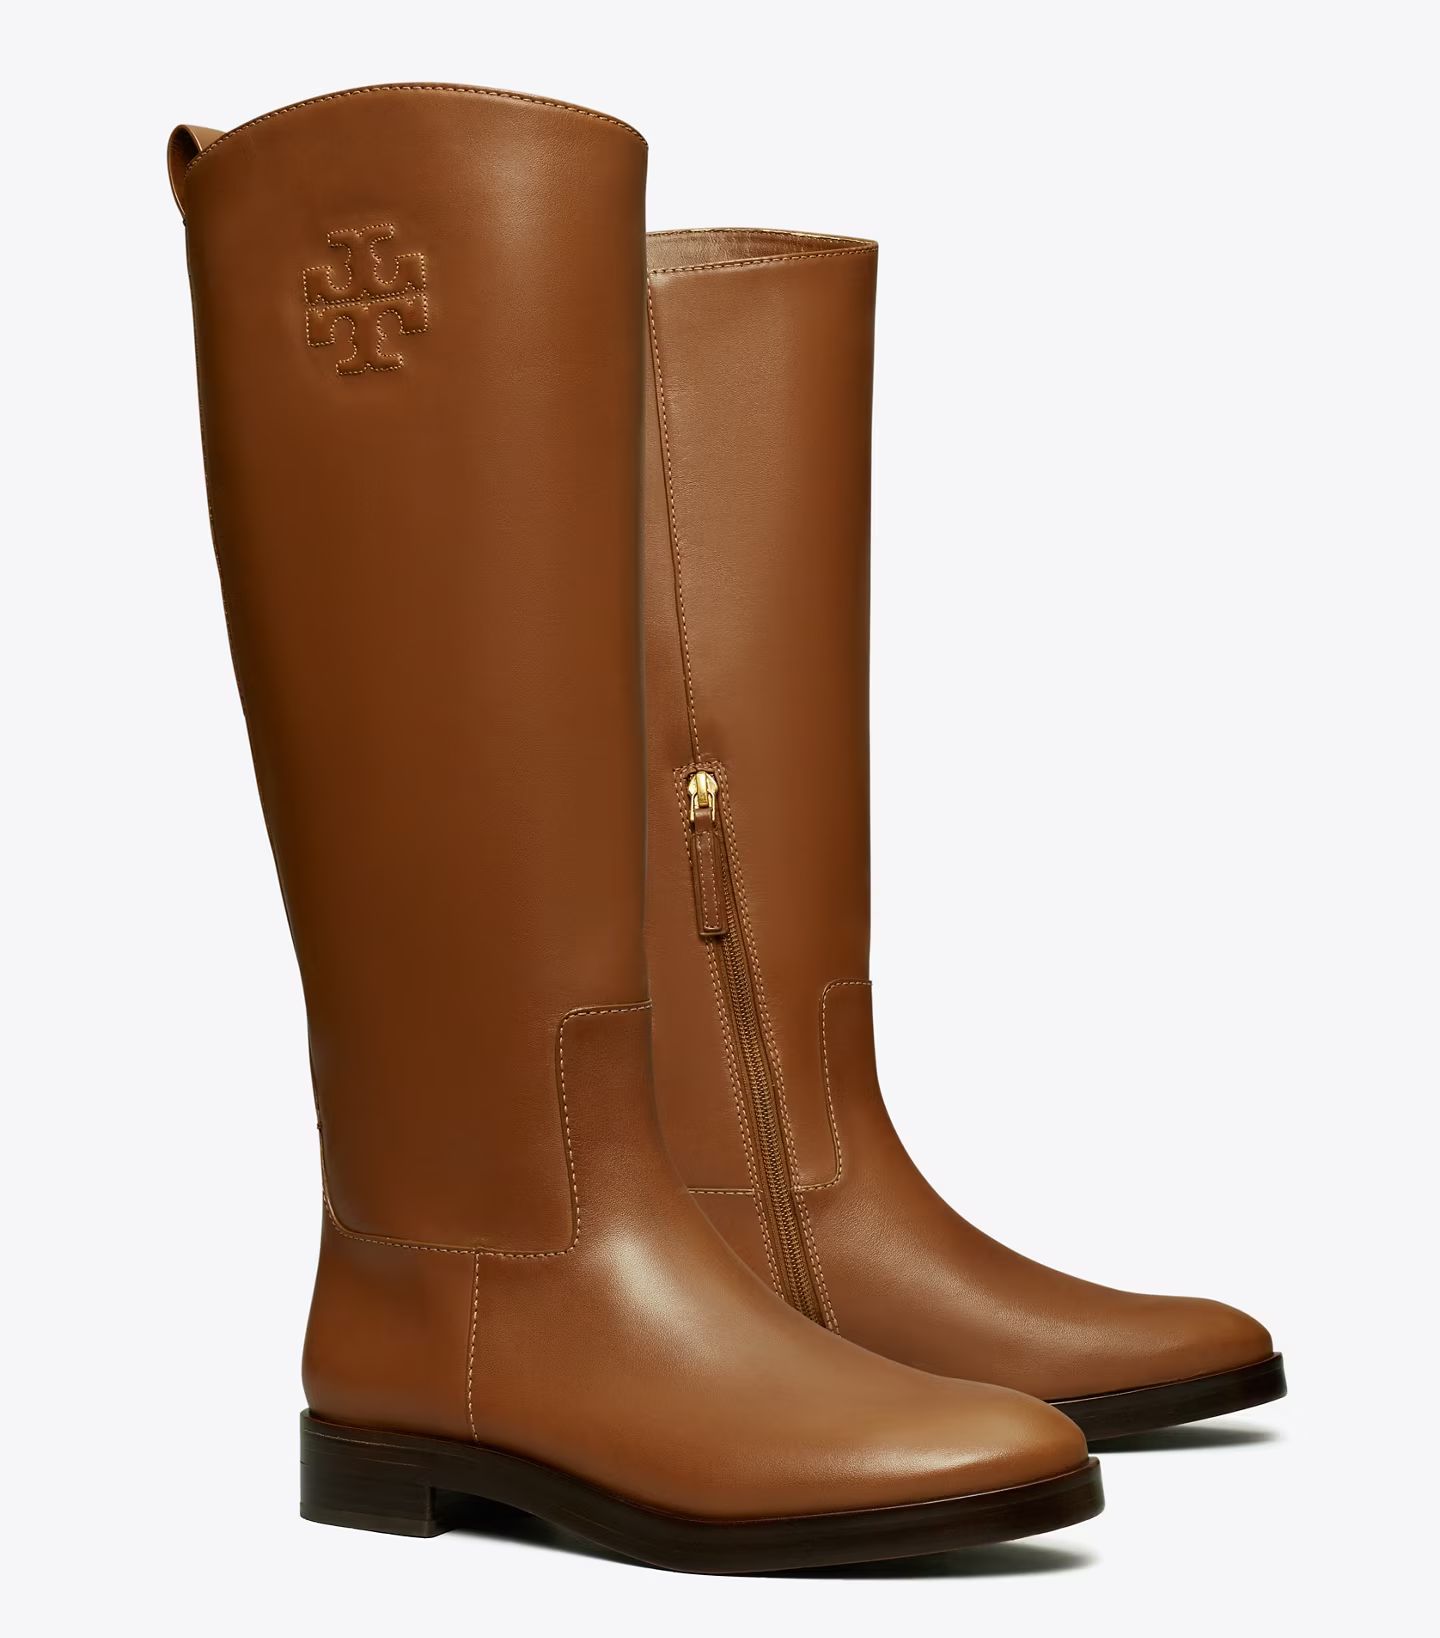 THE RIDING BOOT | Tory Burch (US)